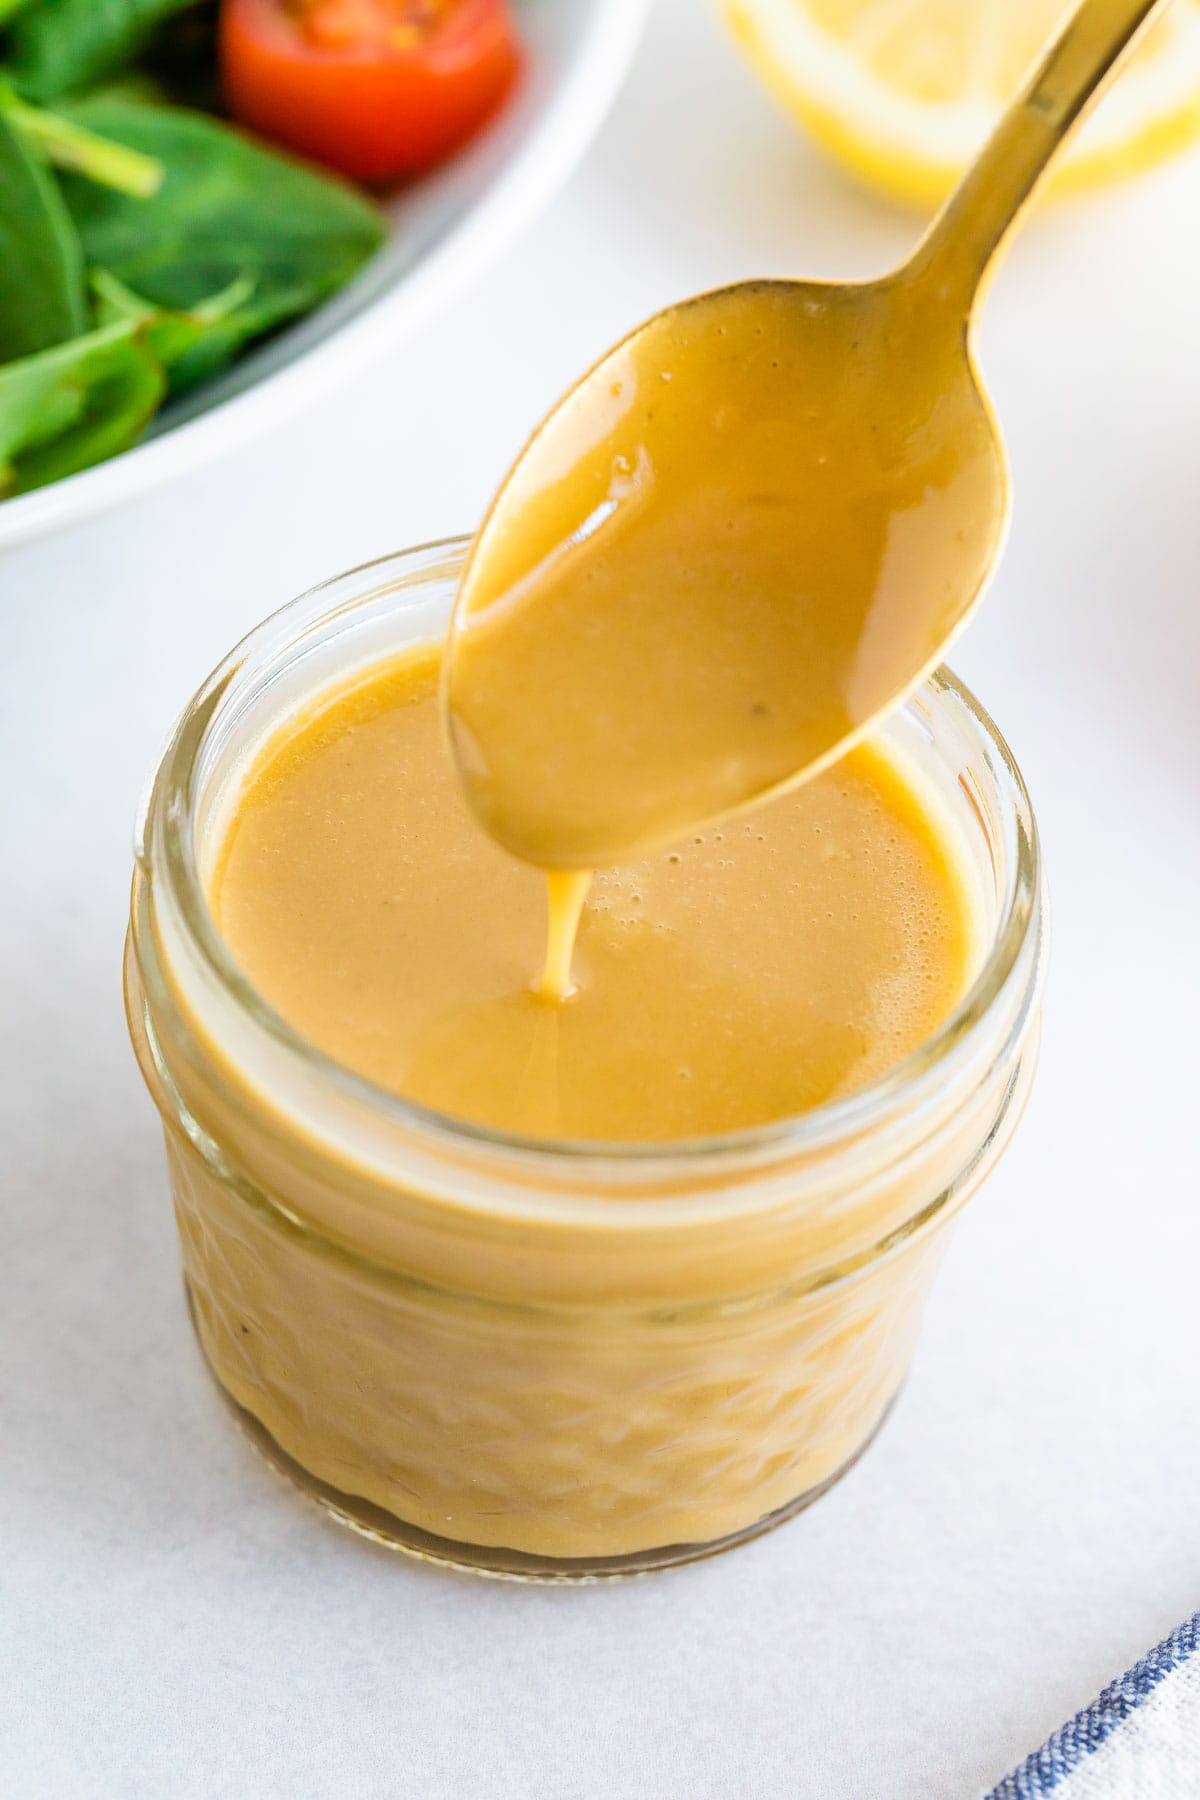 Spoon drizzling some honey mustard dressing from a jar.